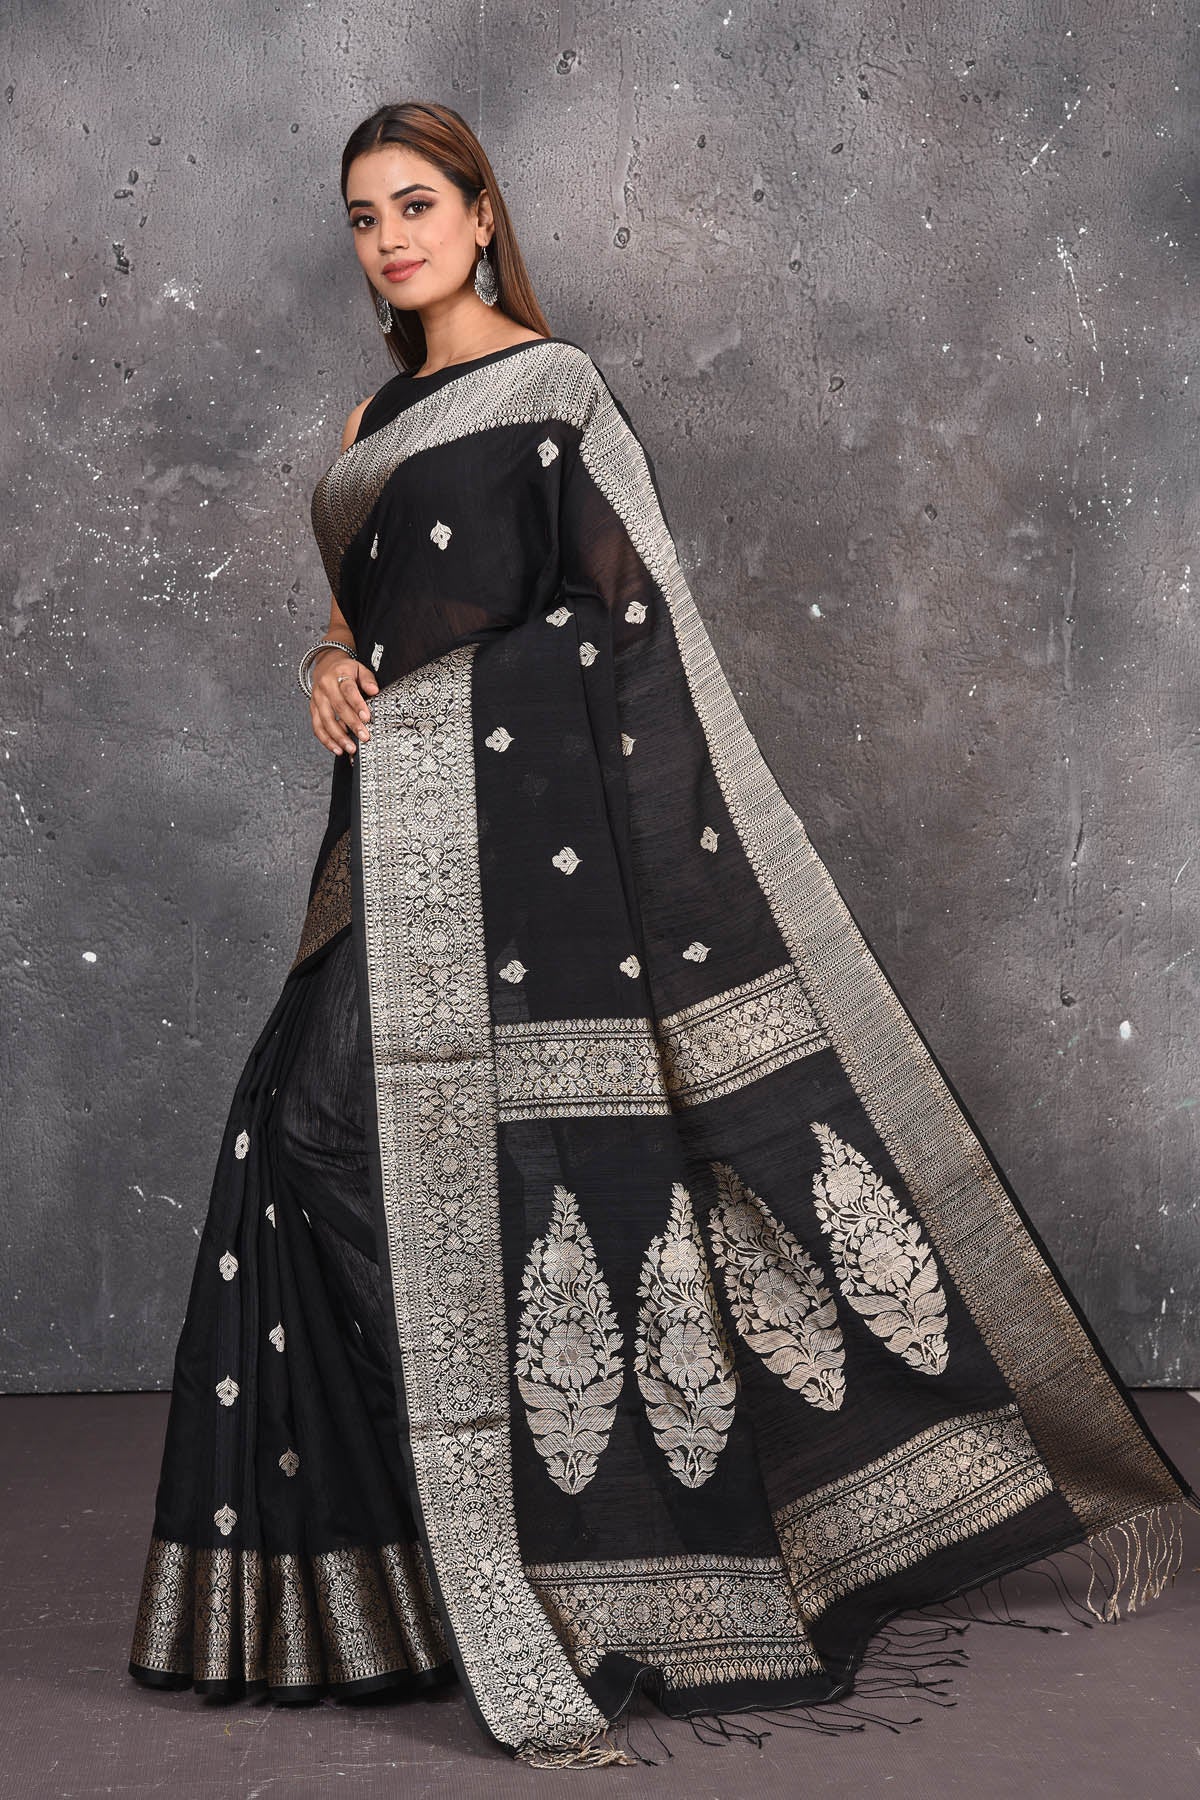 Buy elegant black zari woven matka Silk Banarasi saree with zari broad border online in USA which has crafted by skilled weaver of Banaras with elegance and grace, this saree is definitely the epitome of beauty and a must have in your collection. Buy designer handwoven banarasi brocade sari with any blouse from Pure Elegance Indian saree store in USA. -Side view with open pallu.